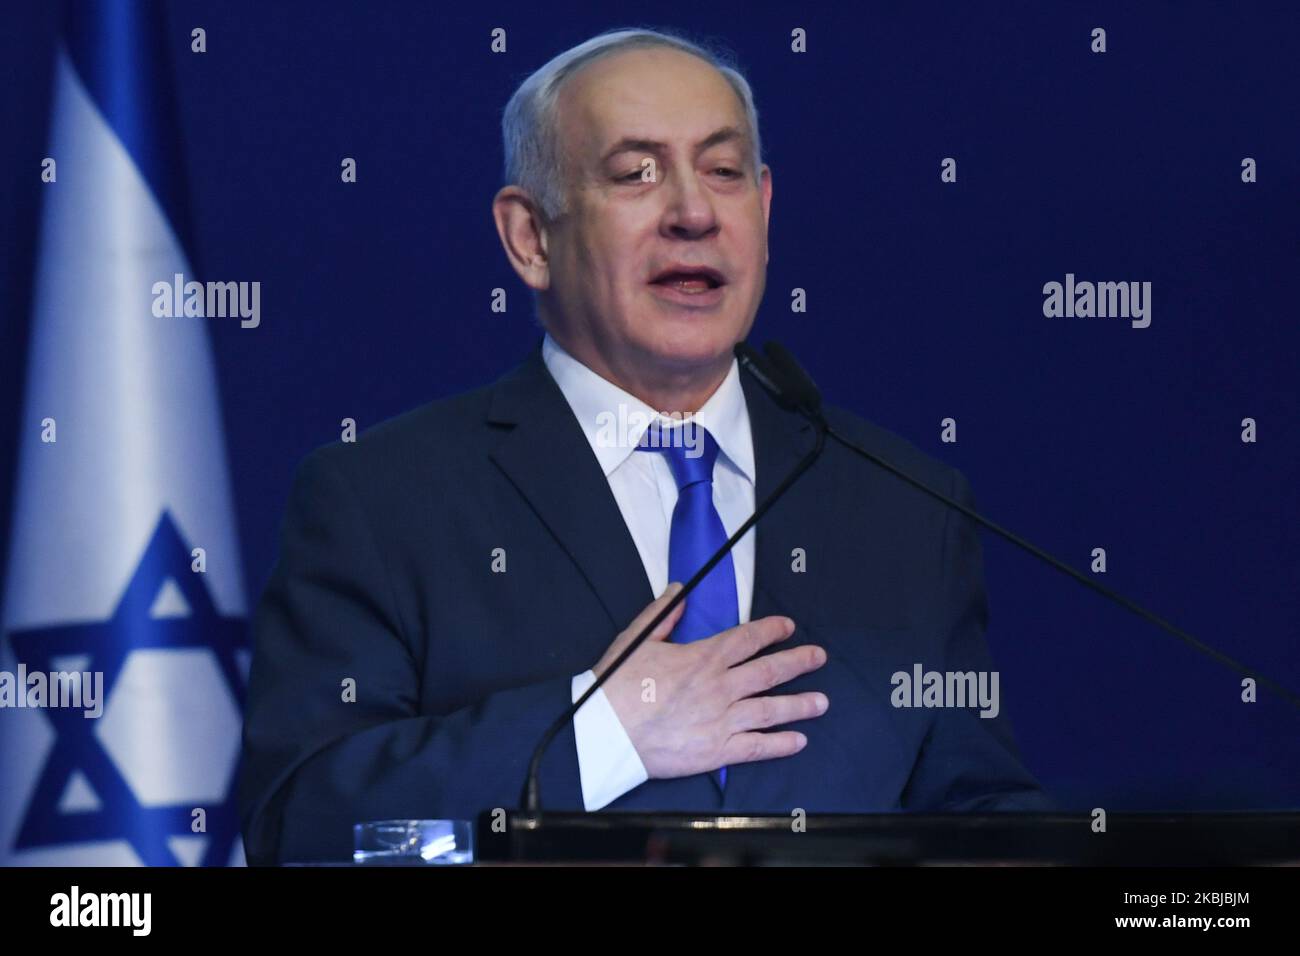 Israeli Prime Minister Benjamin Netanyahu gestures as he speaks to supporters following the announcement of exit polls in Israel's election at his Likud party headquarters in Tel Aviv. On Tuesday, March 3, 2020, in Tel Aviv, Israel. (Photo by Artur Widak/NurPhoto) Stock Photo